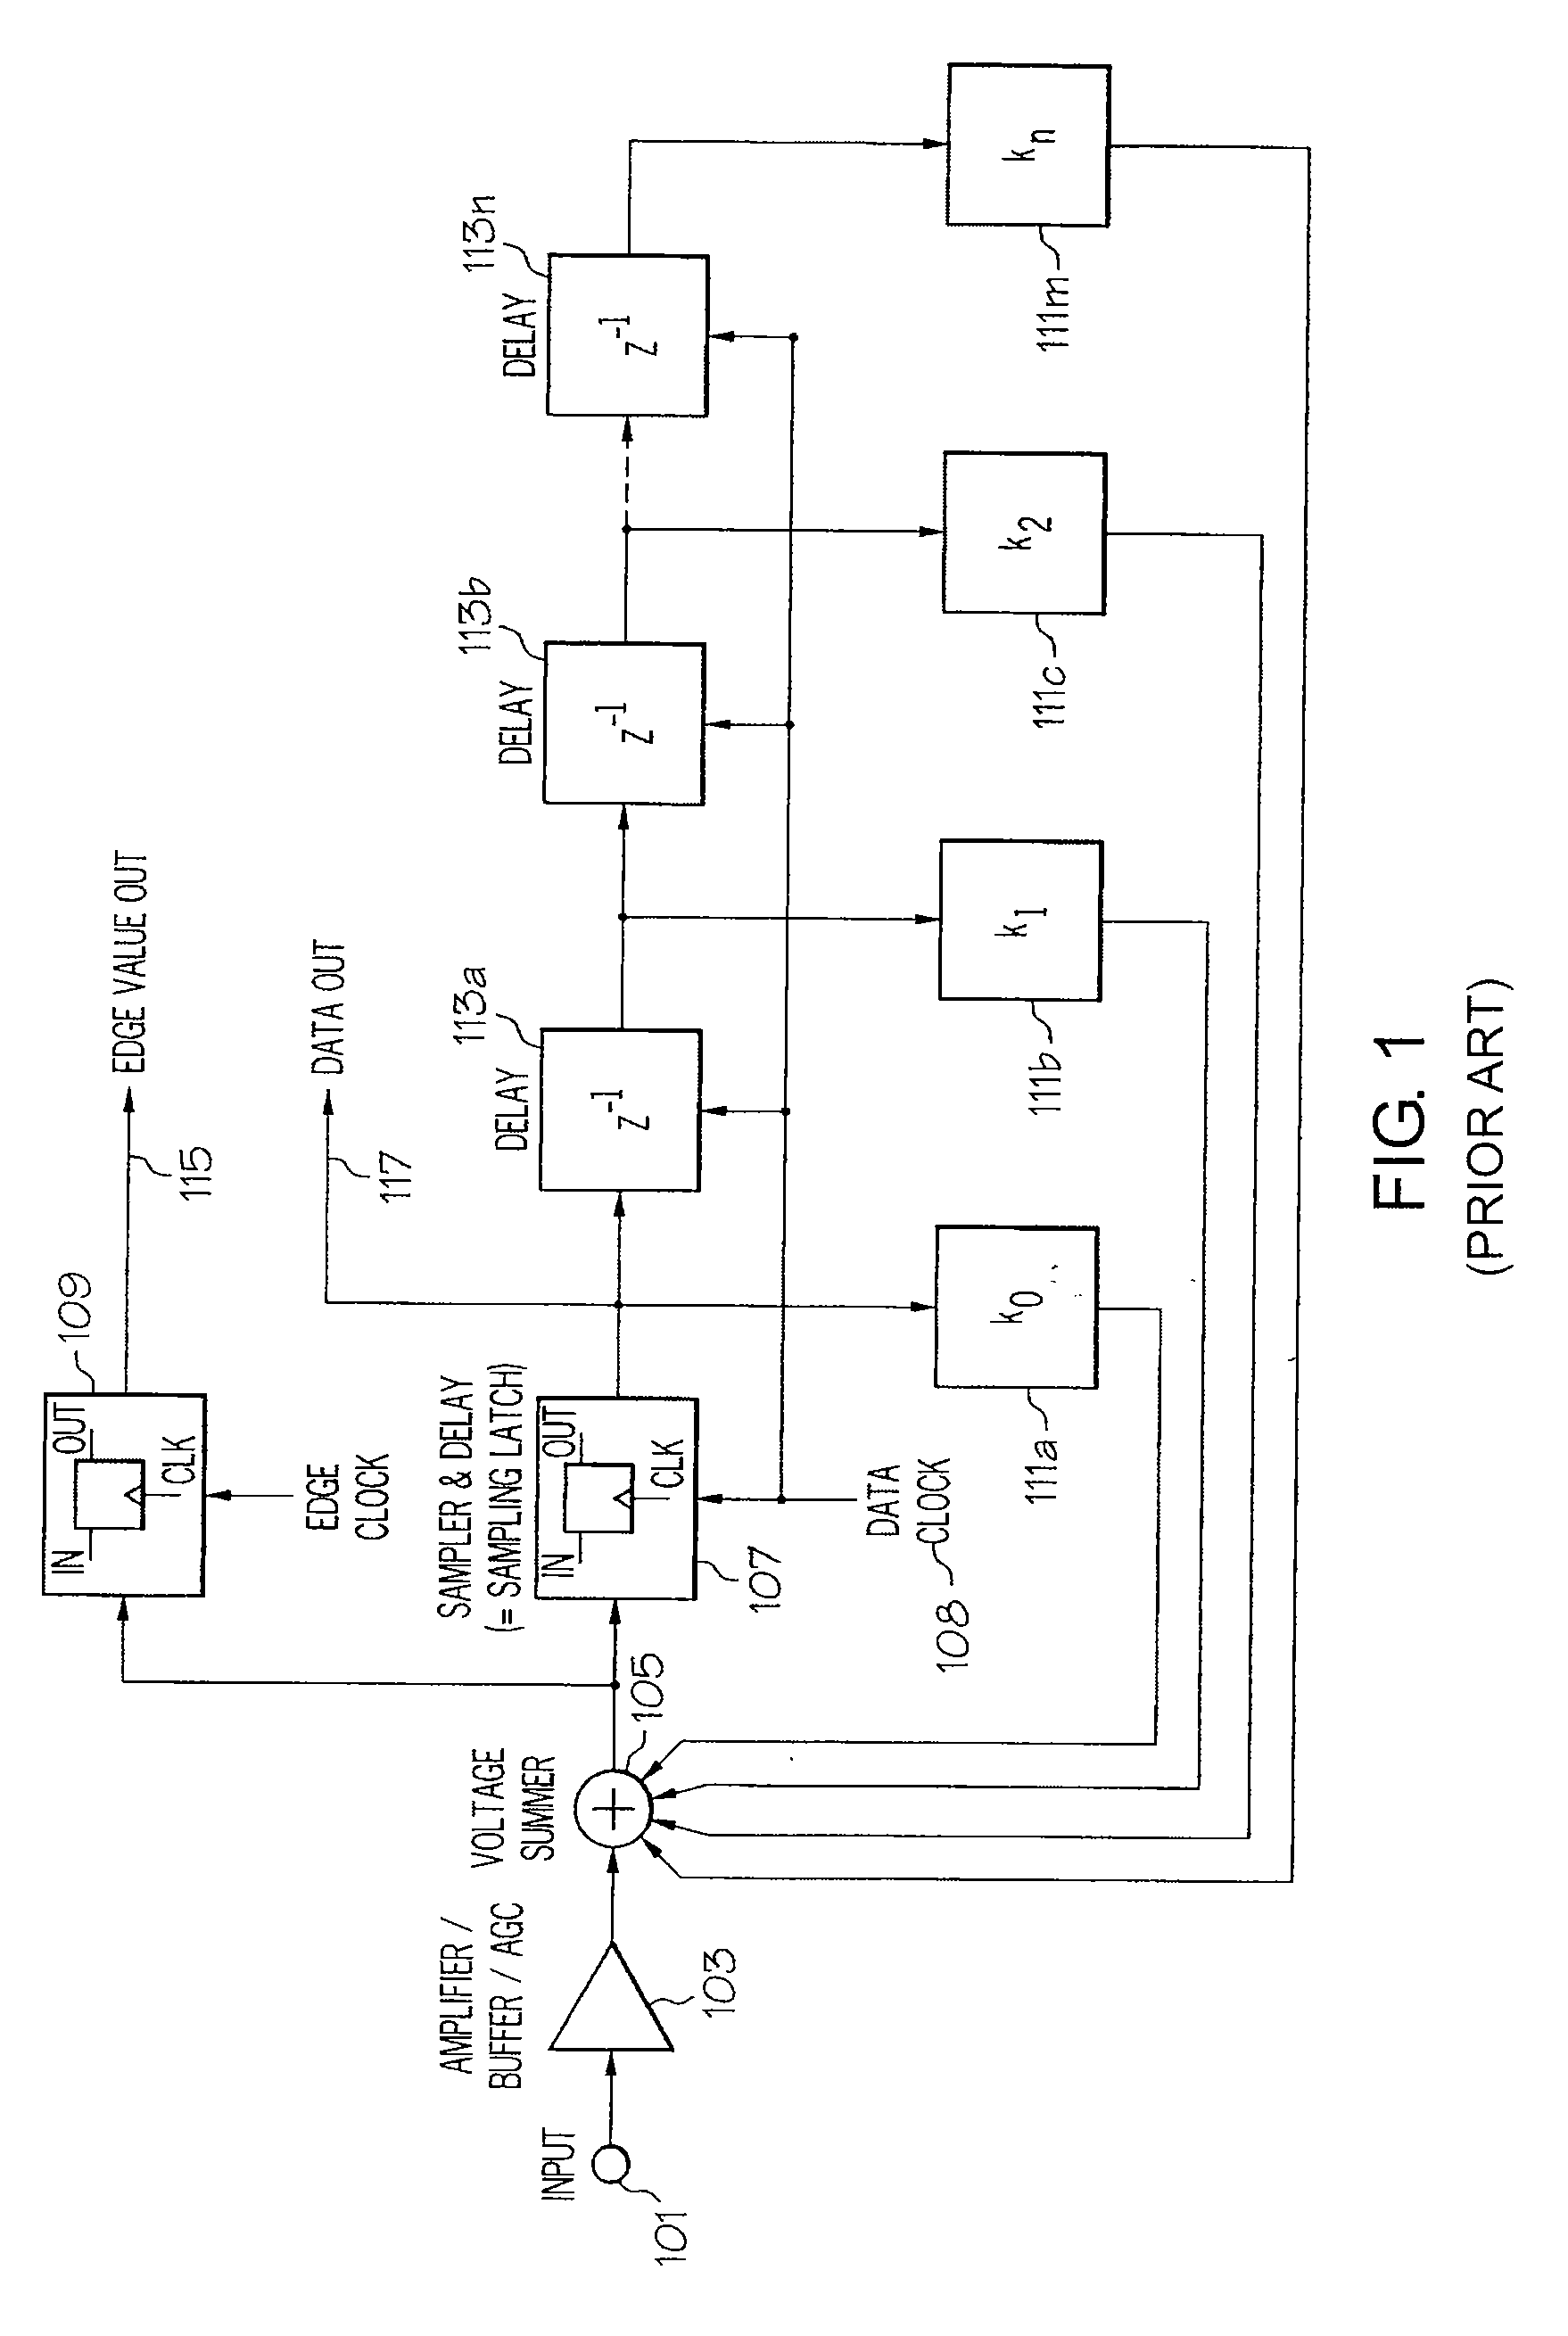 Structure for one-sample-per-bit decision feedback equalizer (DFE) clock and data recovery